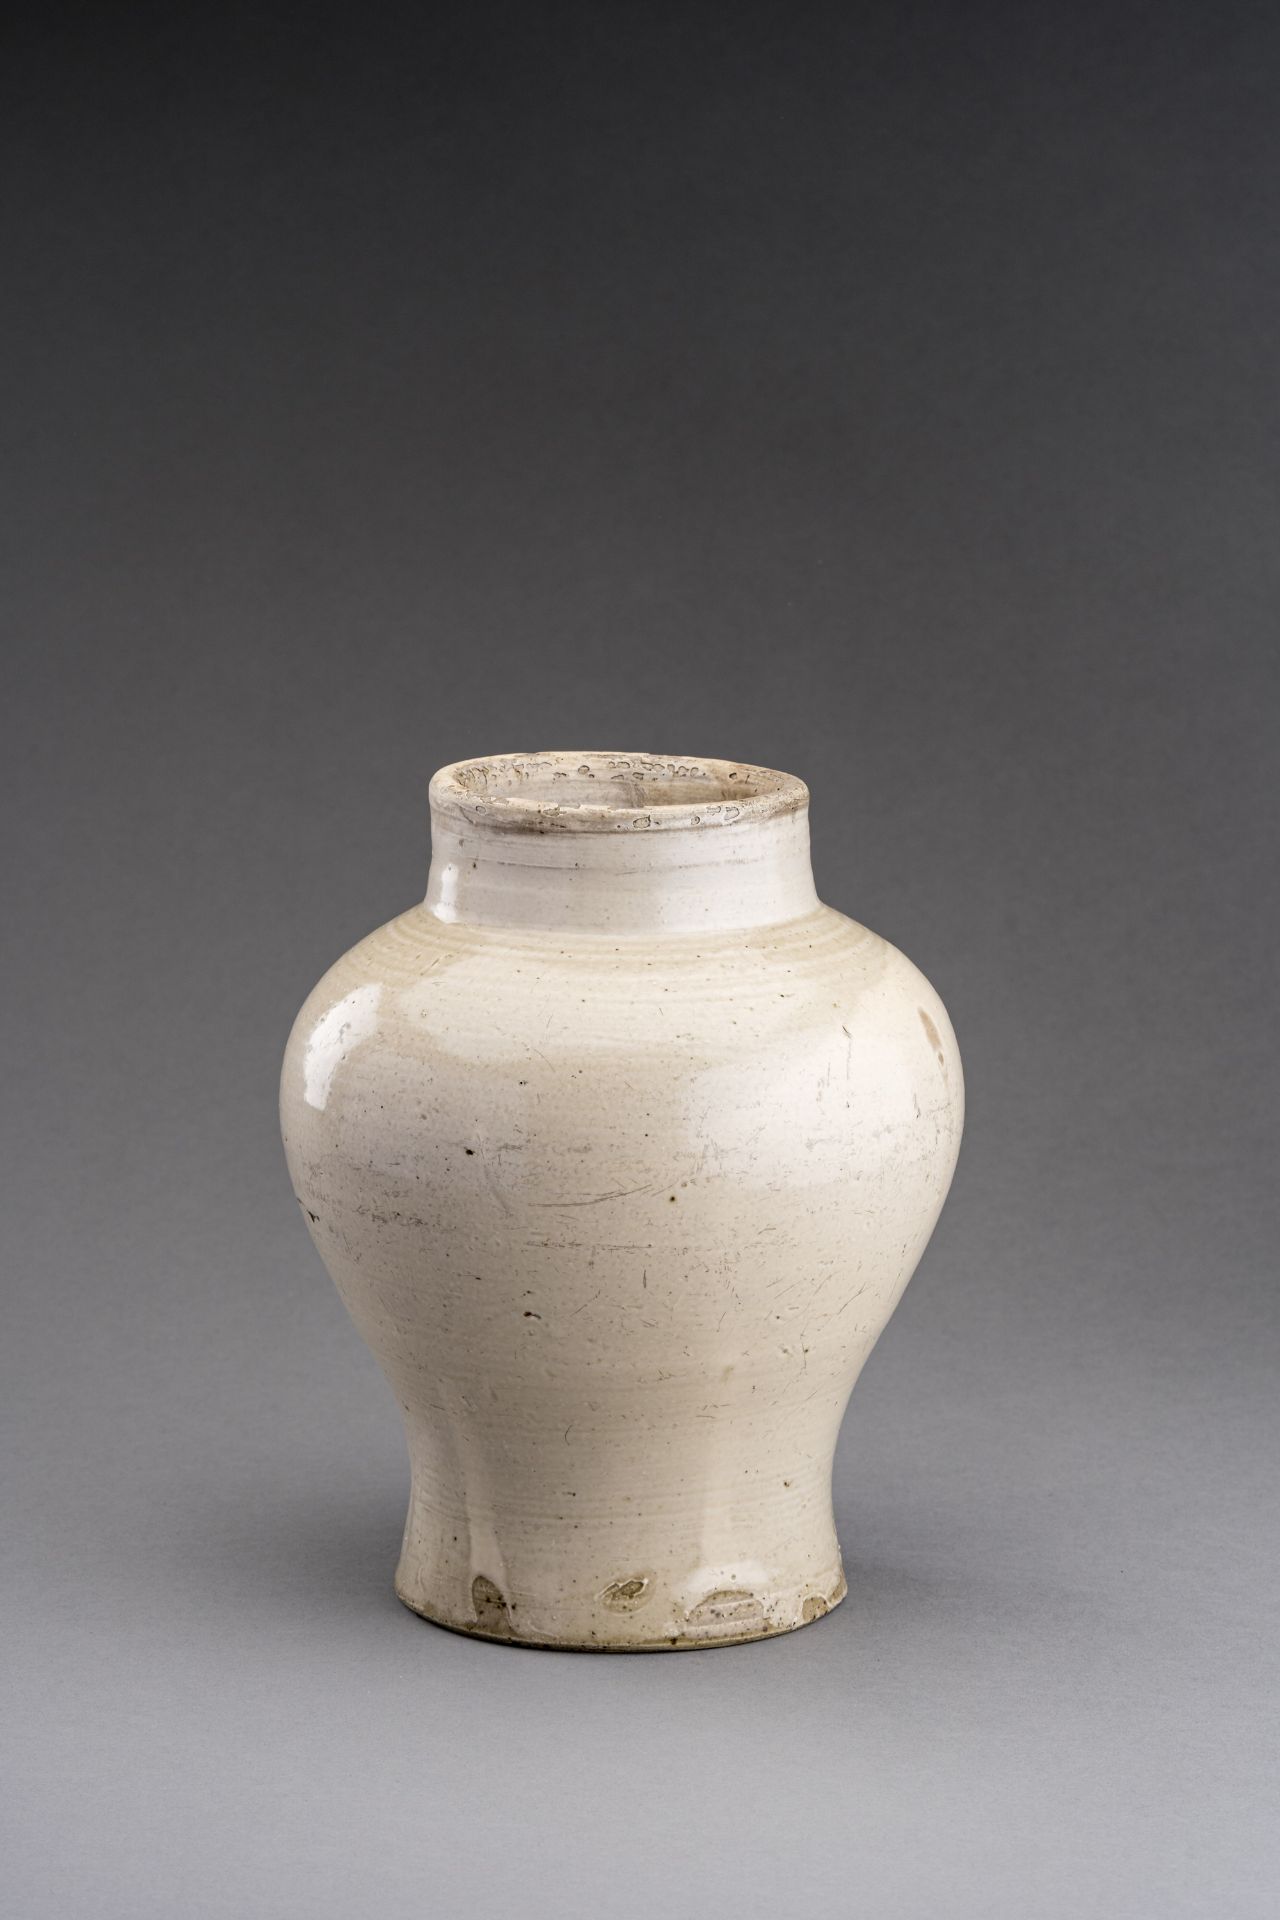 A CREAM GLAZED CERAMIC JAR, SONG TO YUAN DYNASTY - Image 2 of 6